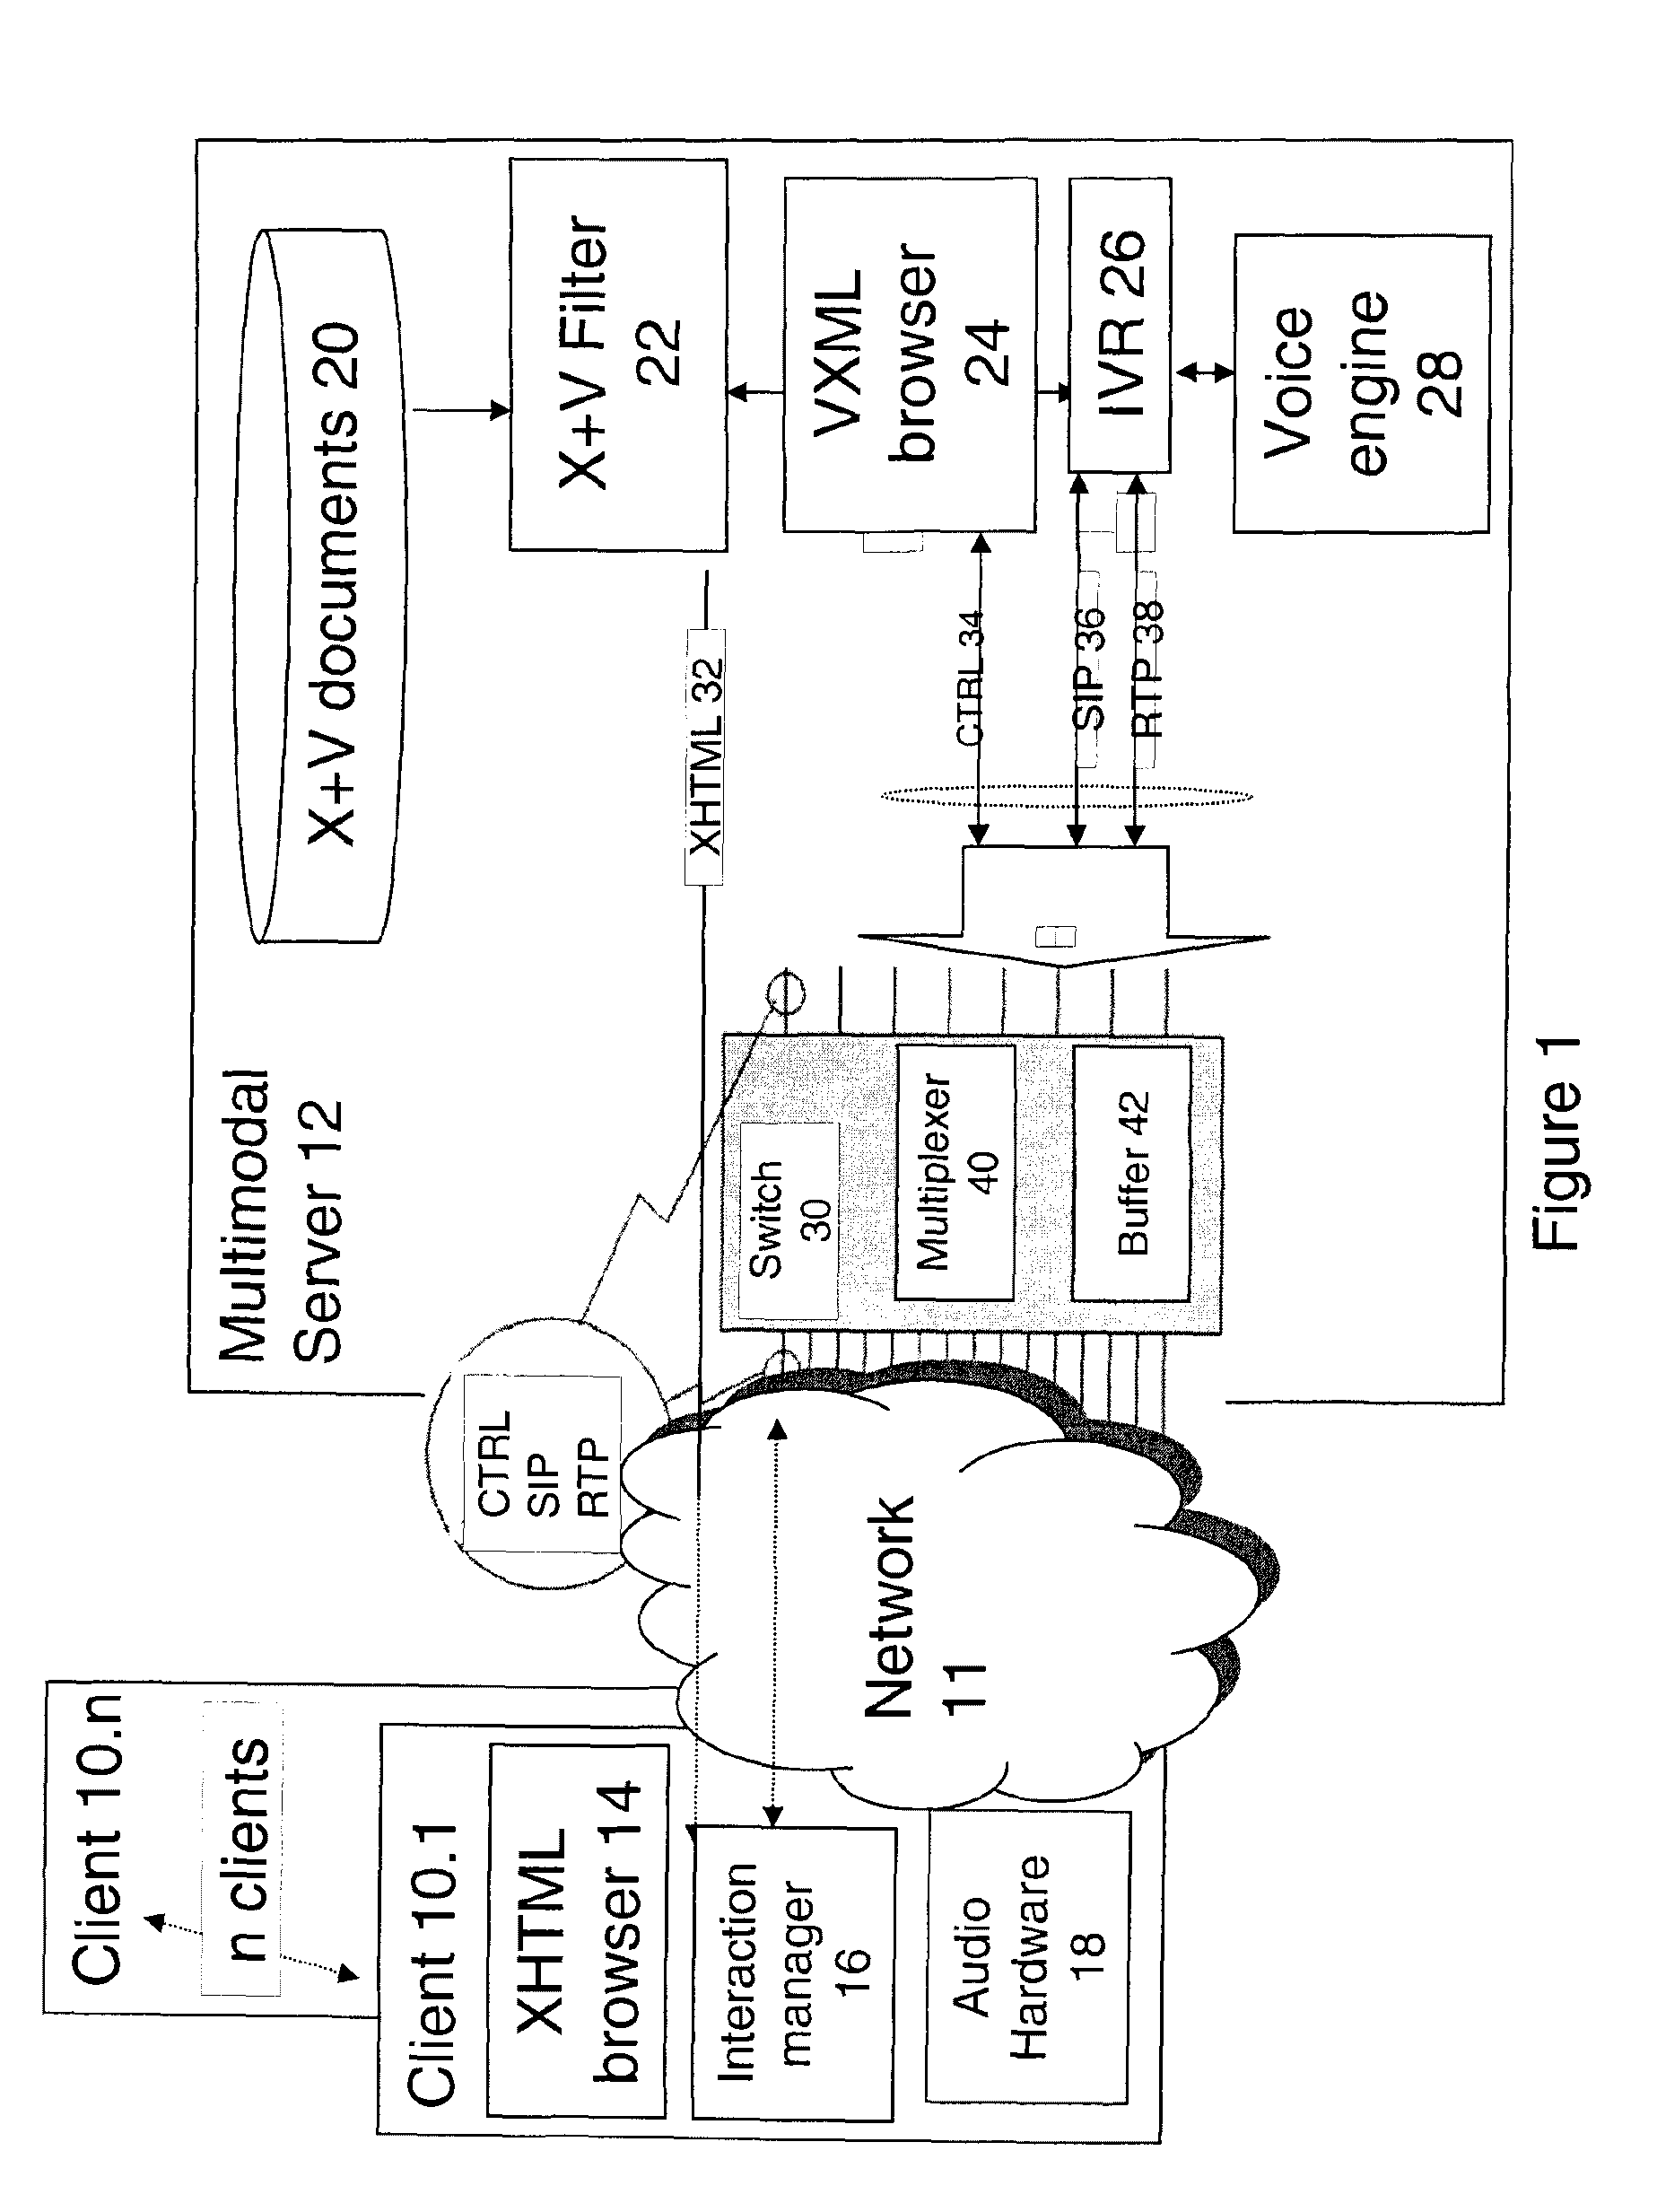 Method and apparatus for multimodal voice and web services